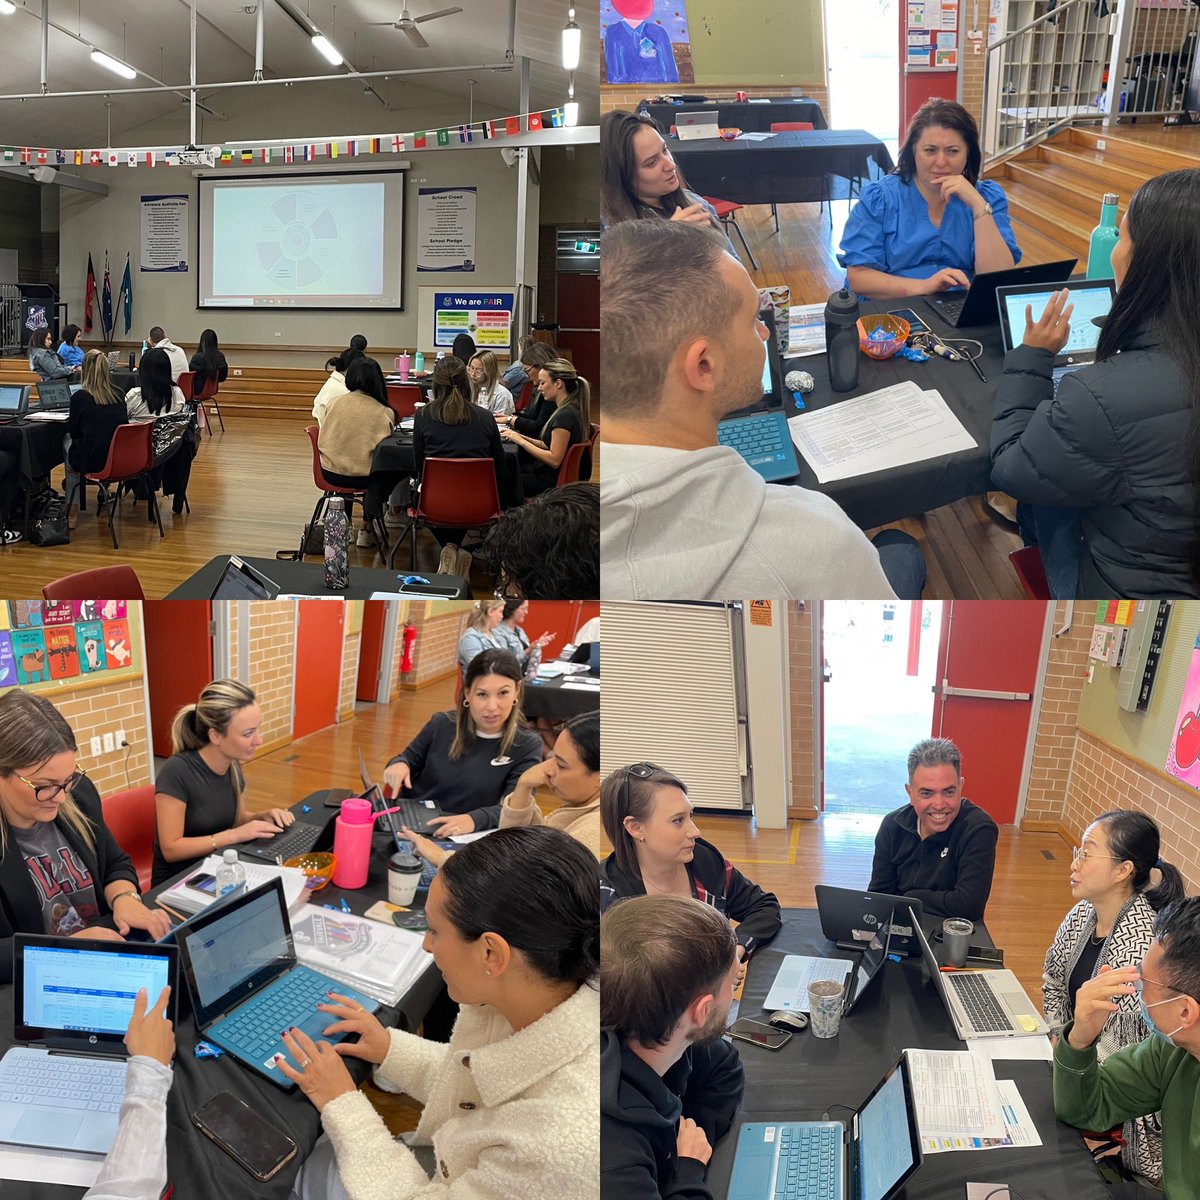 Fairvale staff had an invaluable day of learning during Term 2’s SDD. The sessions focused on professional development covering purposeful assessment, implementing effective writing instruction, and exploring strategies to engage EAL/D learners. 🐸📚 @AnthonyPitt4